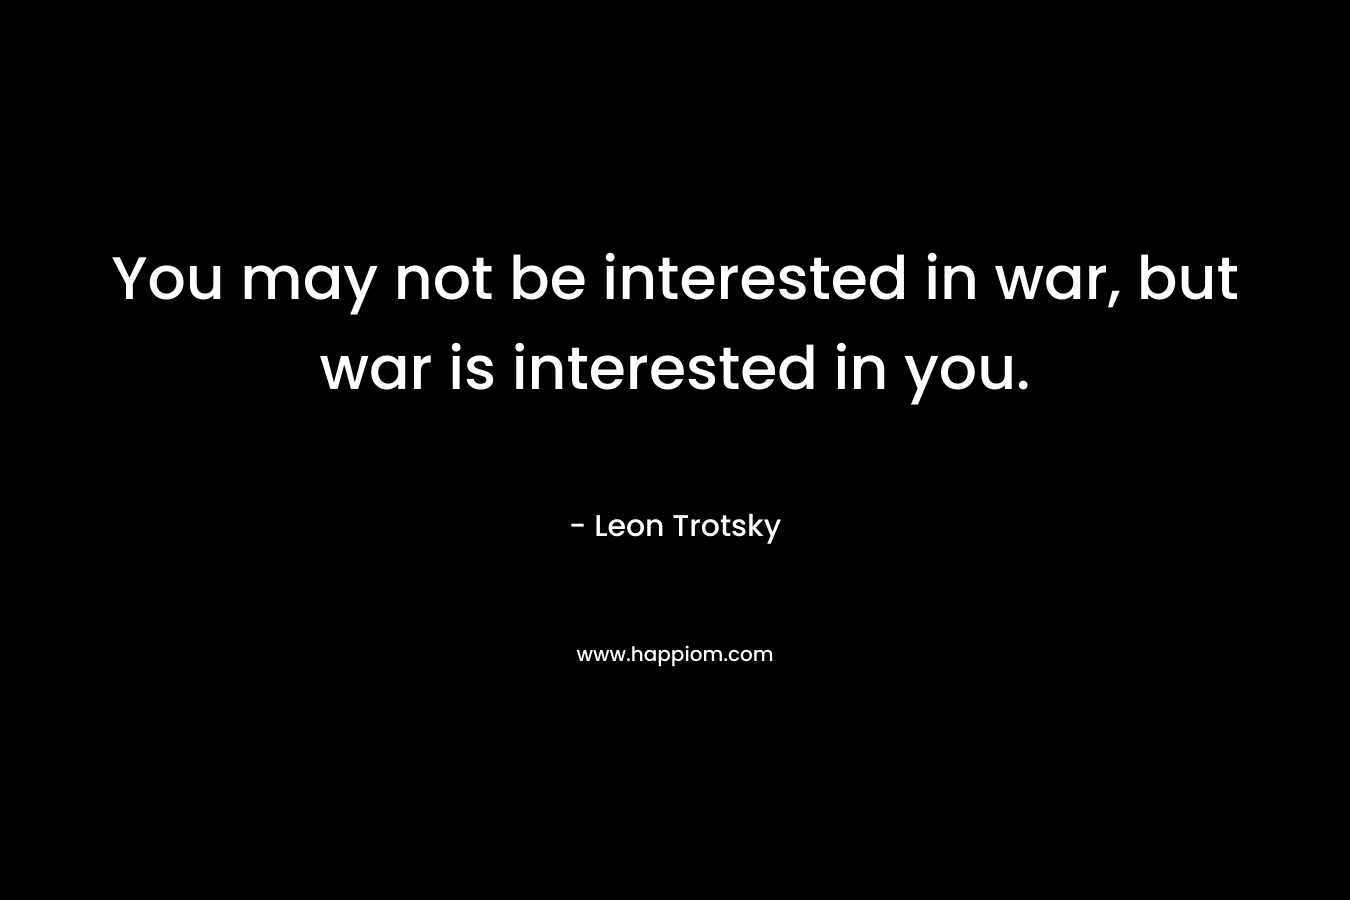 You may not be interested in war, but war is interested in you. – Leon Trotsky